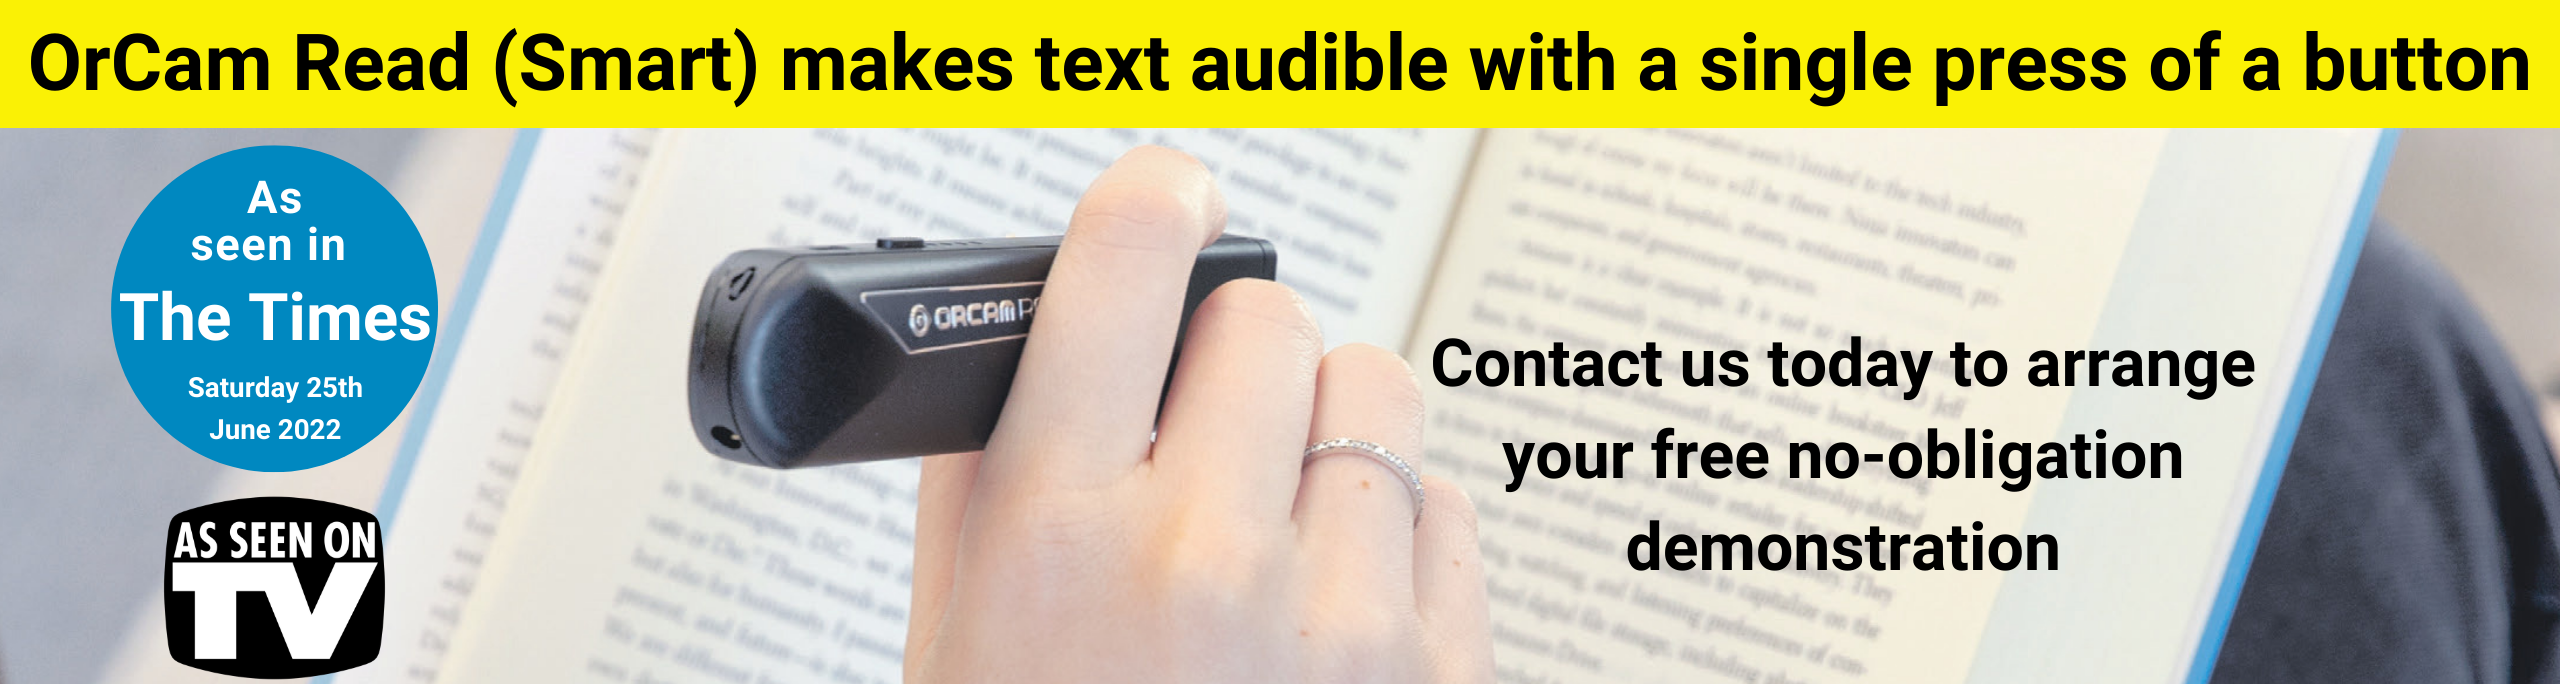 OrCam Read (Smart) makes text audible with a single press of a button. As seen in The Times Saturday 25th June 2022, As seen on TV. Contact us today for your free no-obligation demonstration